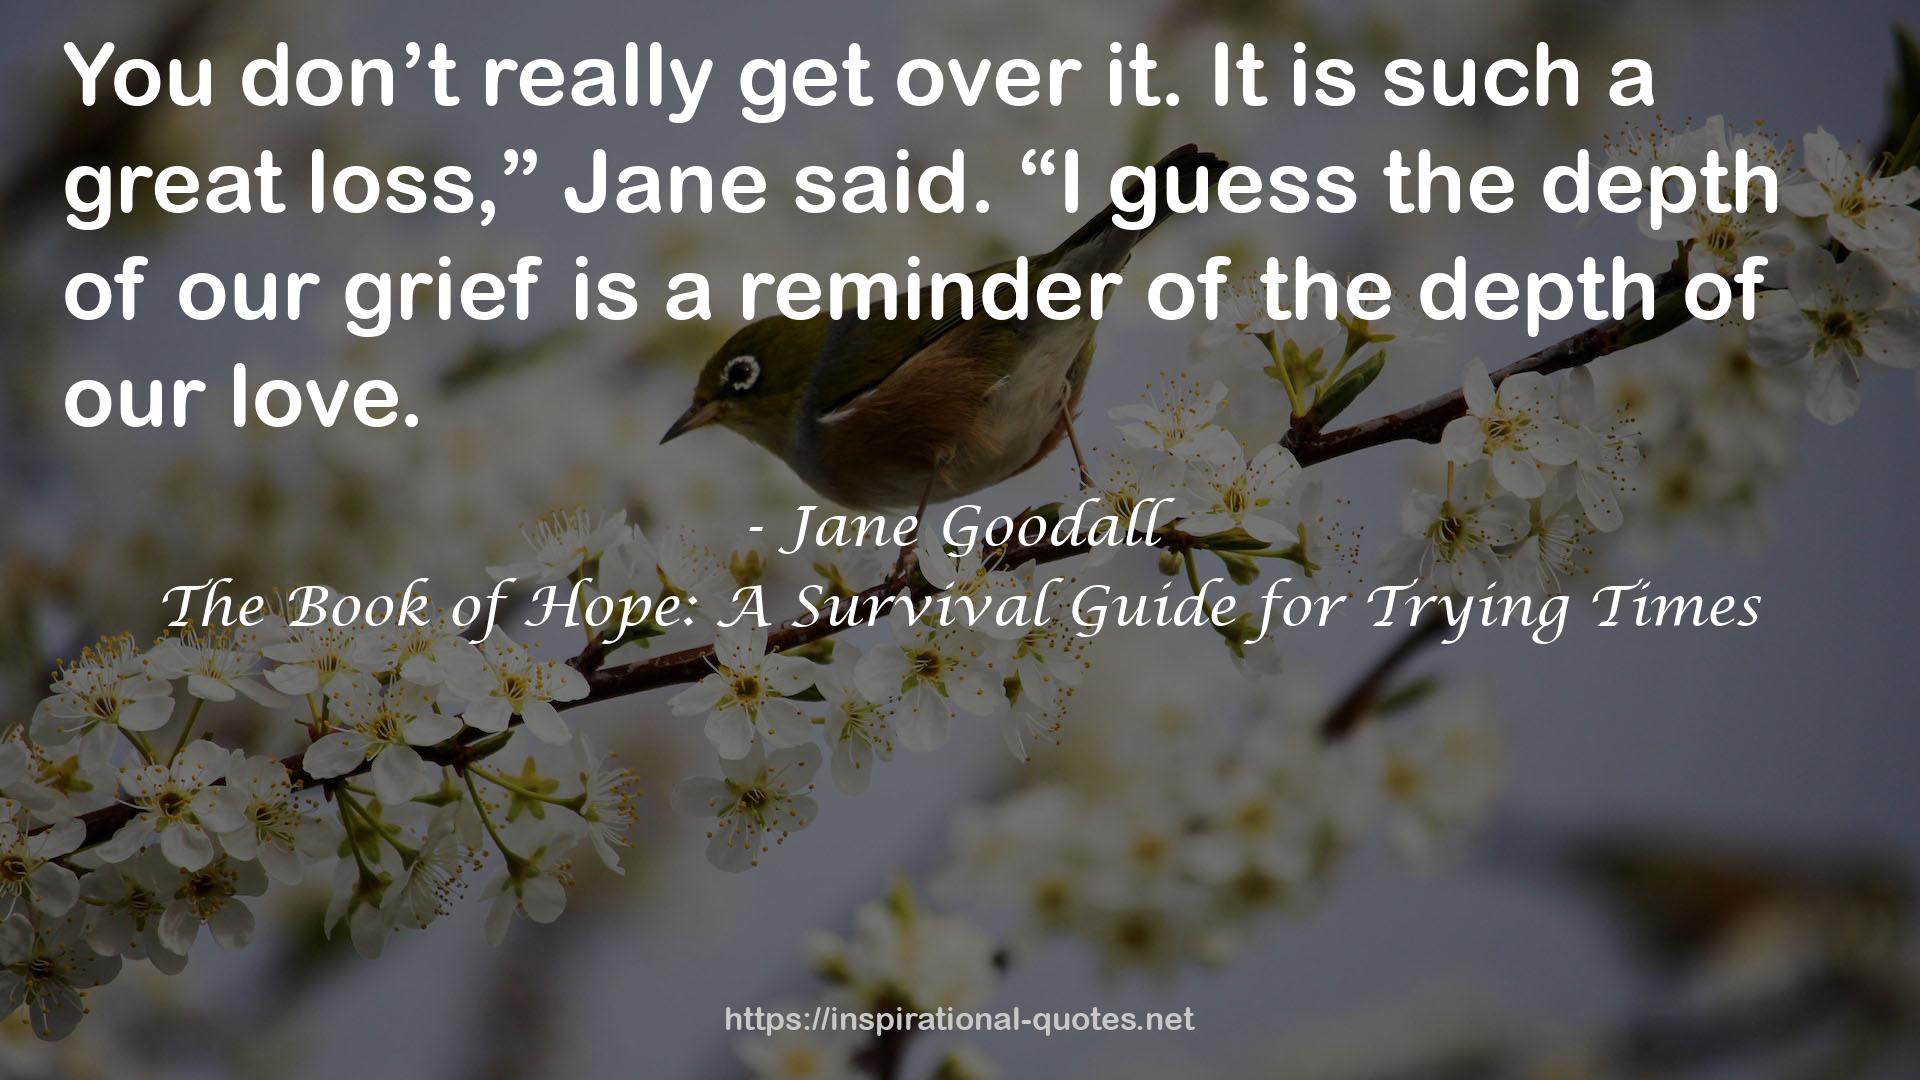 The Book of Hope: A Survival Guide for Trying Times QUOTES